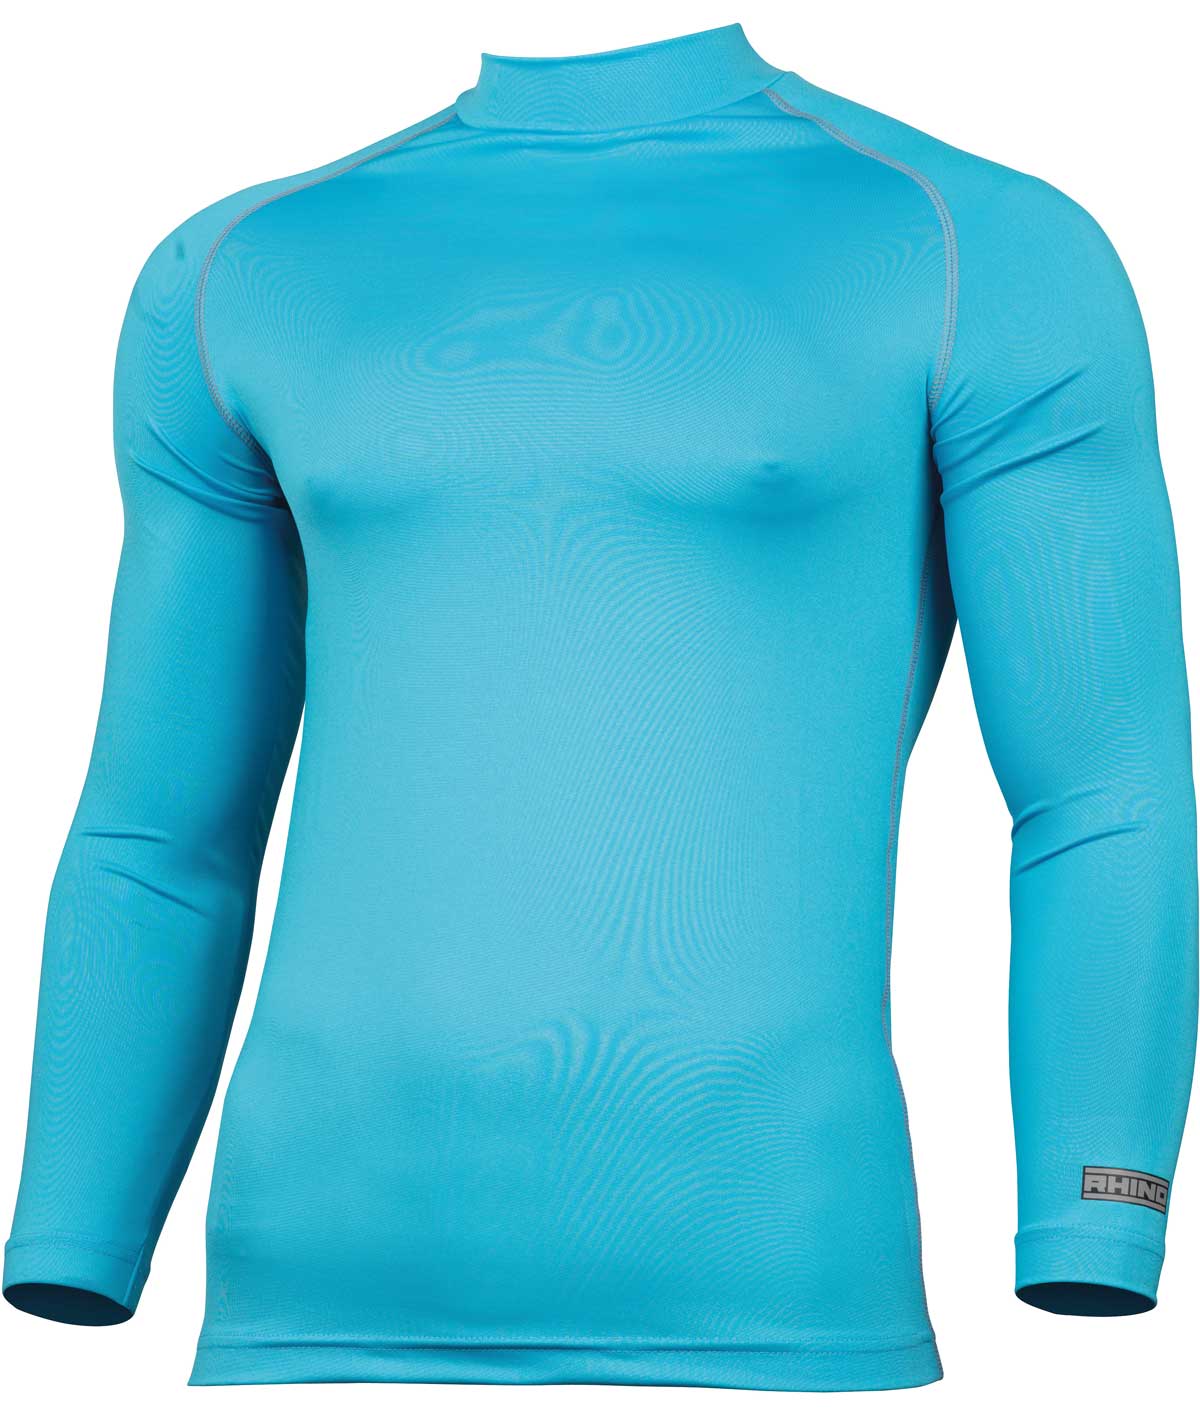 Base Layer Tops